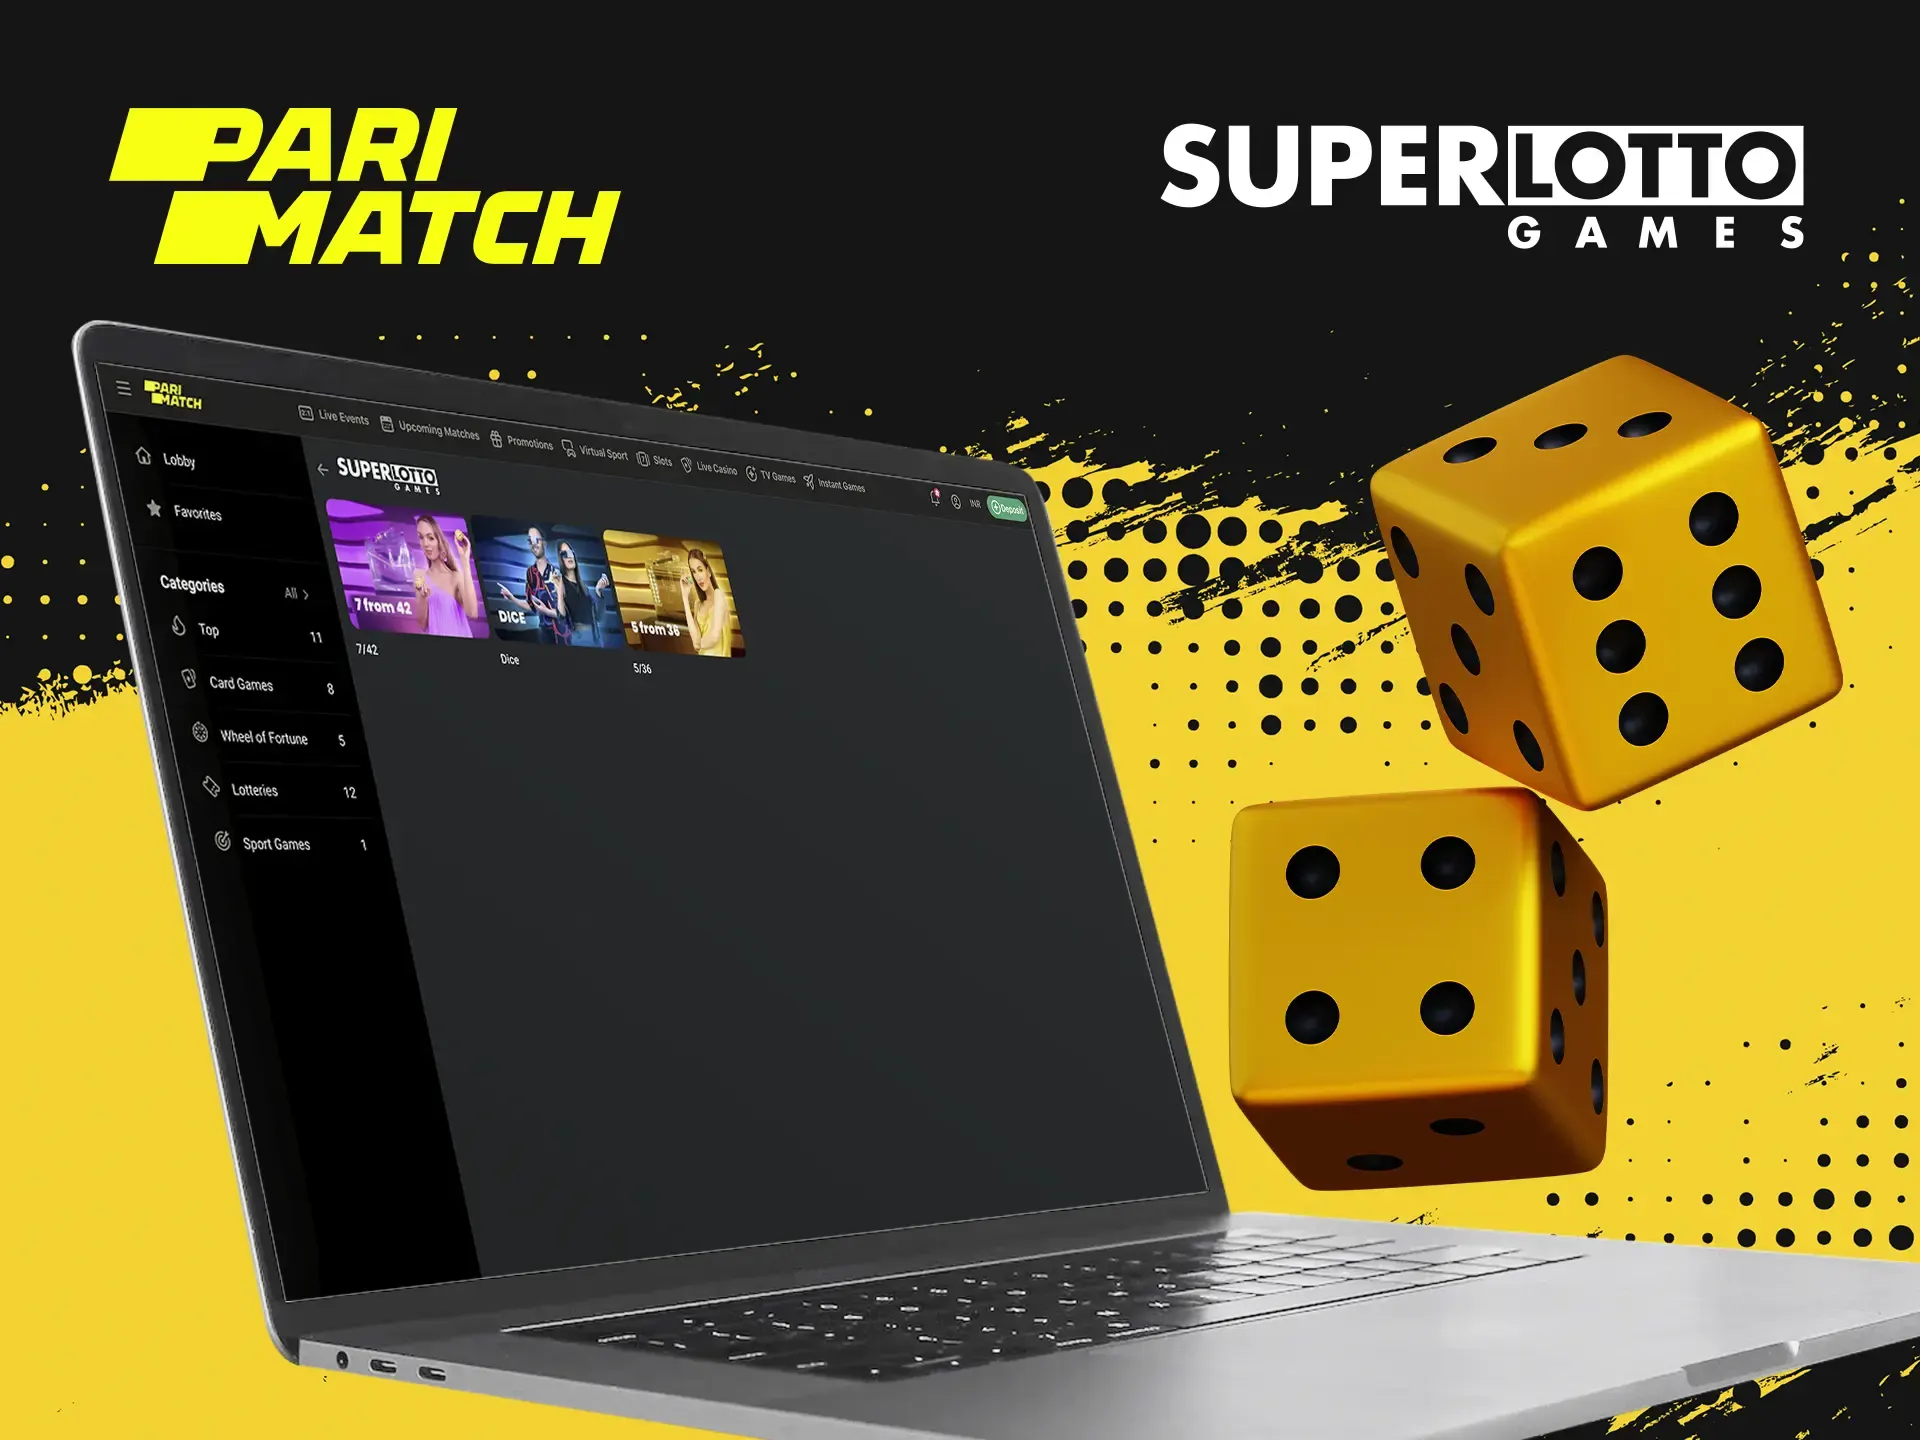 Parimatch presents you one of the best Superlotto providers in which you have a great chance to win.